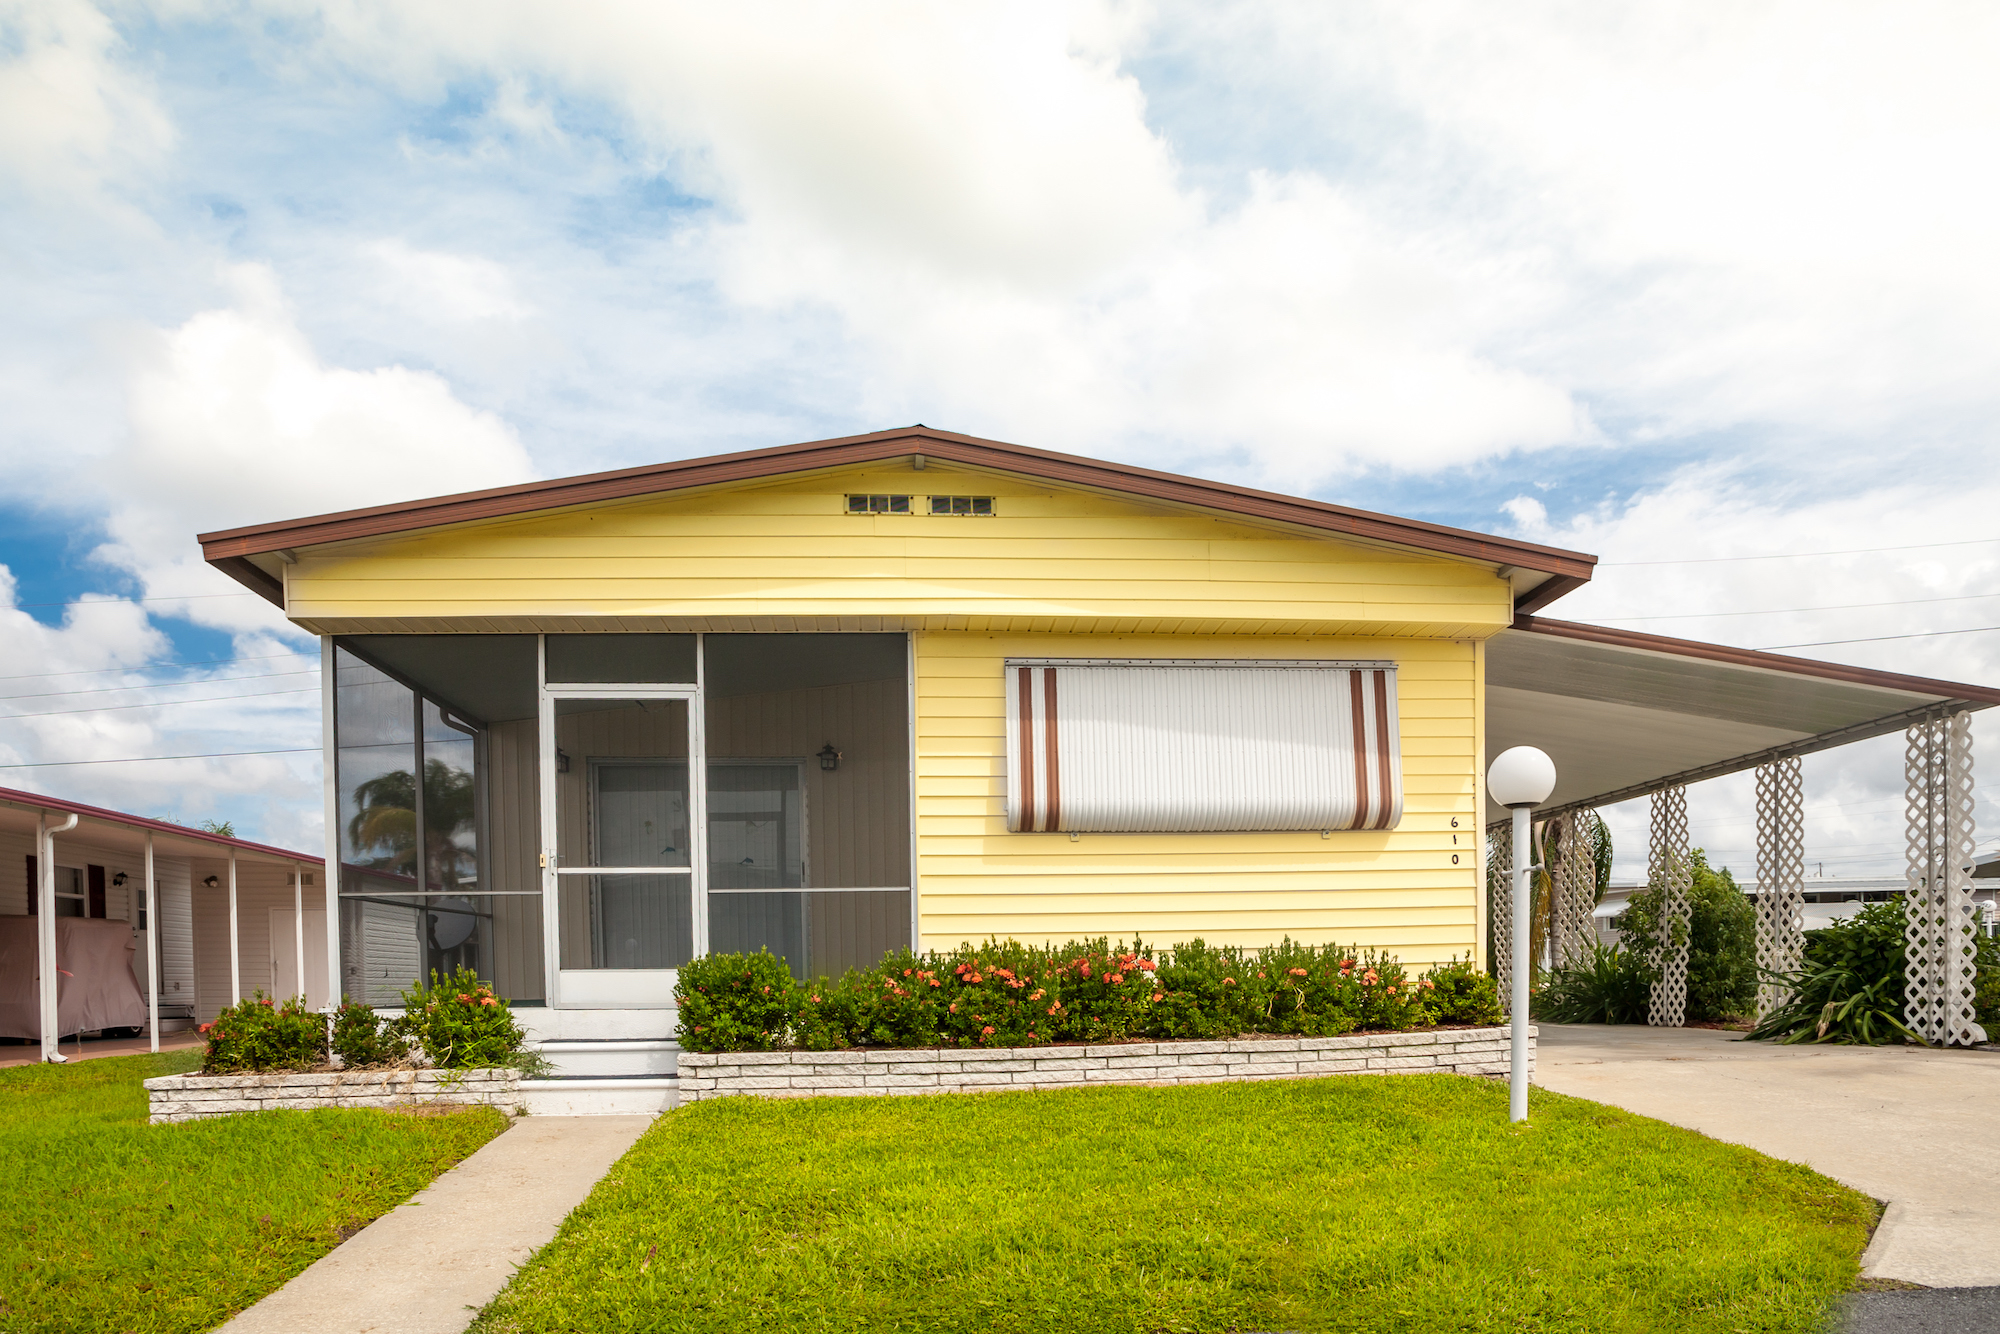 MANUFACTURED HOME INSURANCE